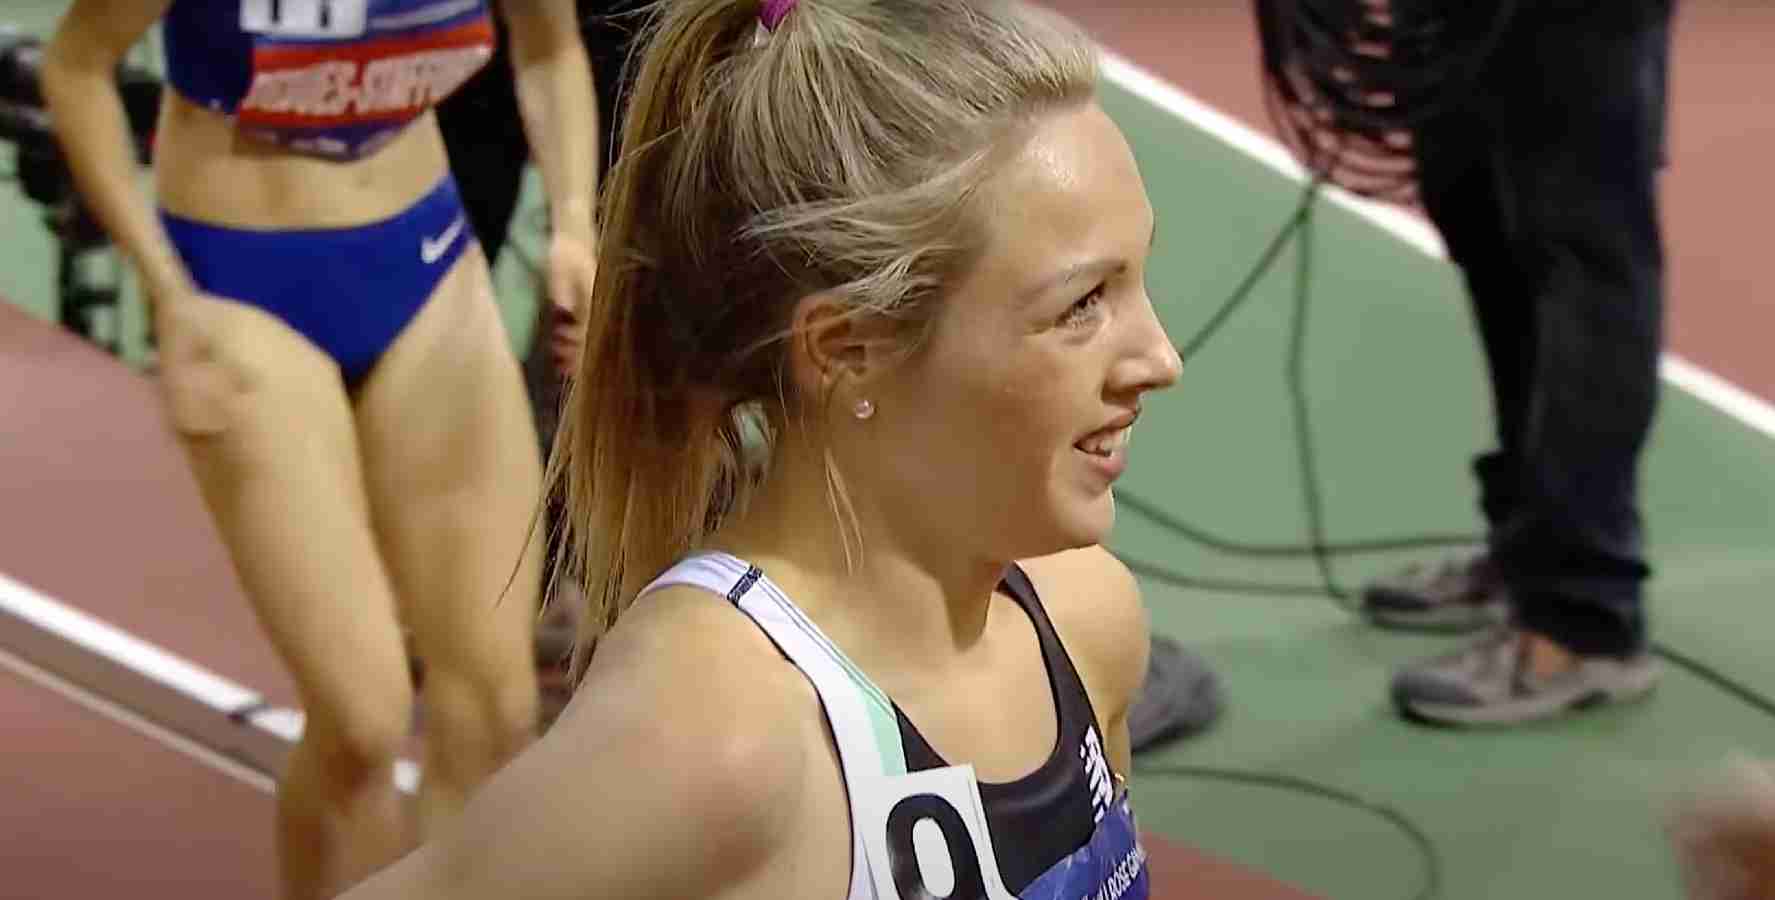 Purrier St. Pierre, Olli among the highlighted performers at Millrose Games